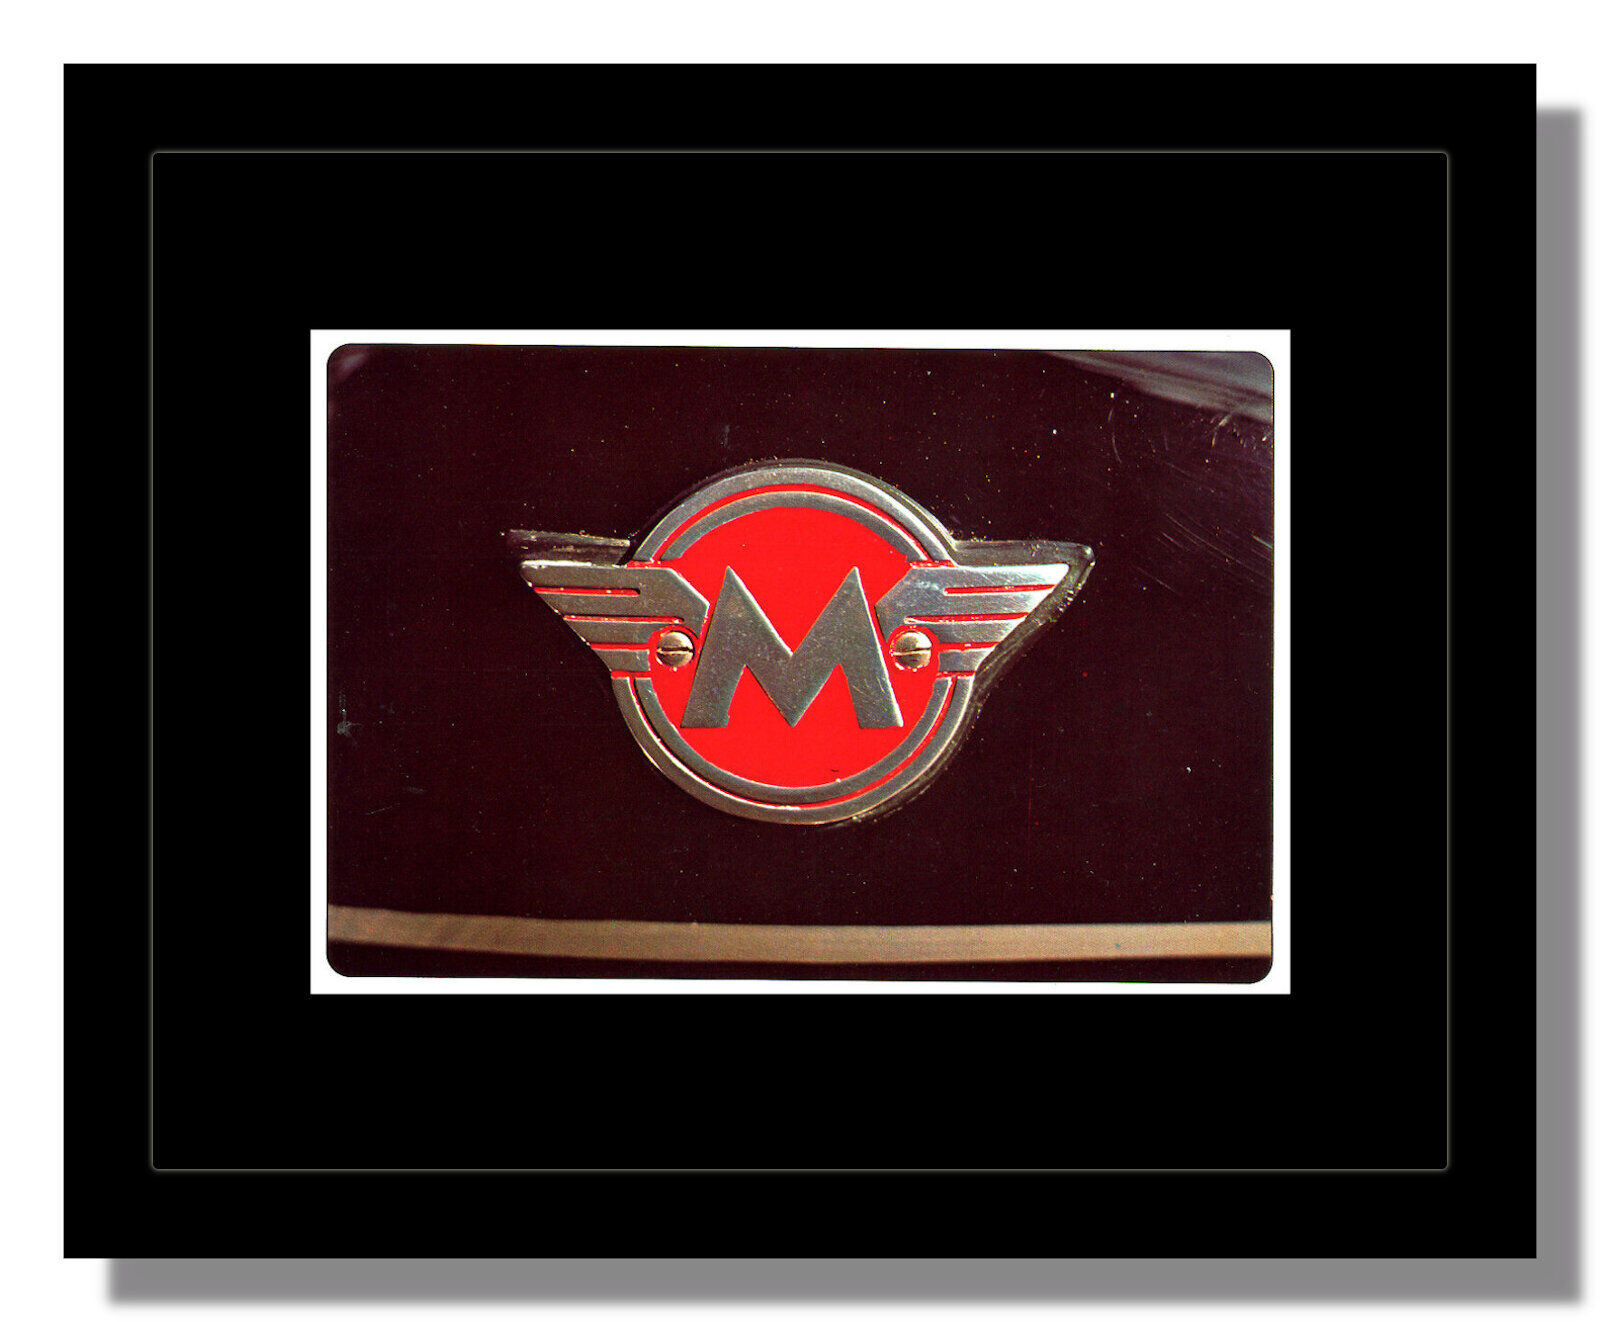 Matchless 500 G80CS compy 1952 framed picture of logo free p&p UK